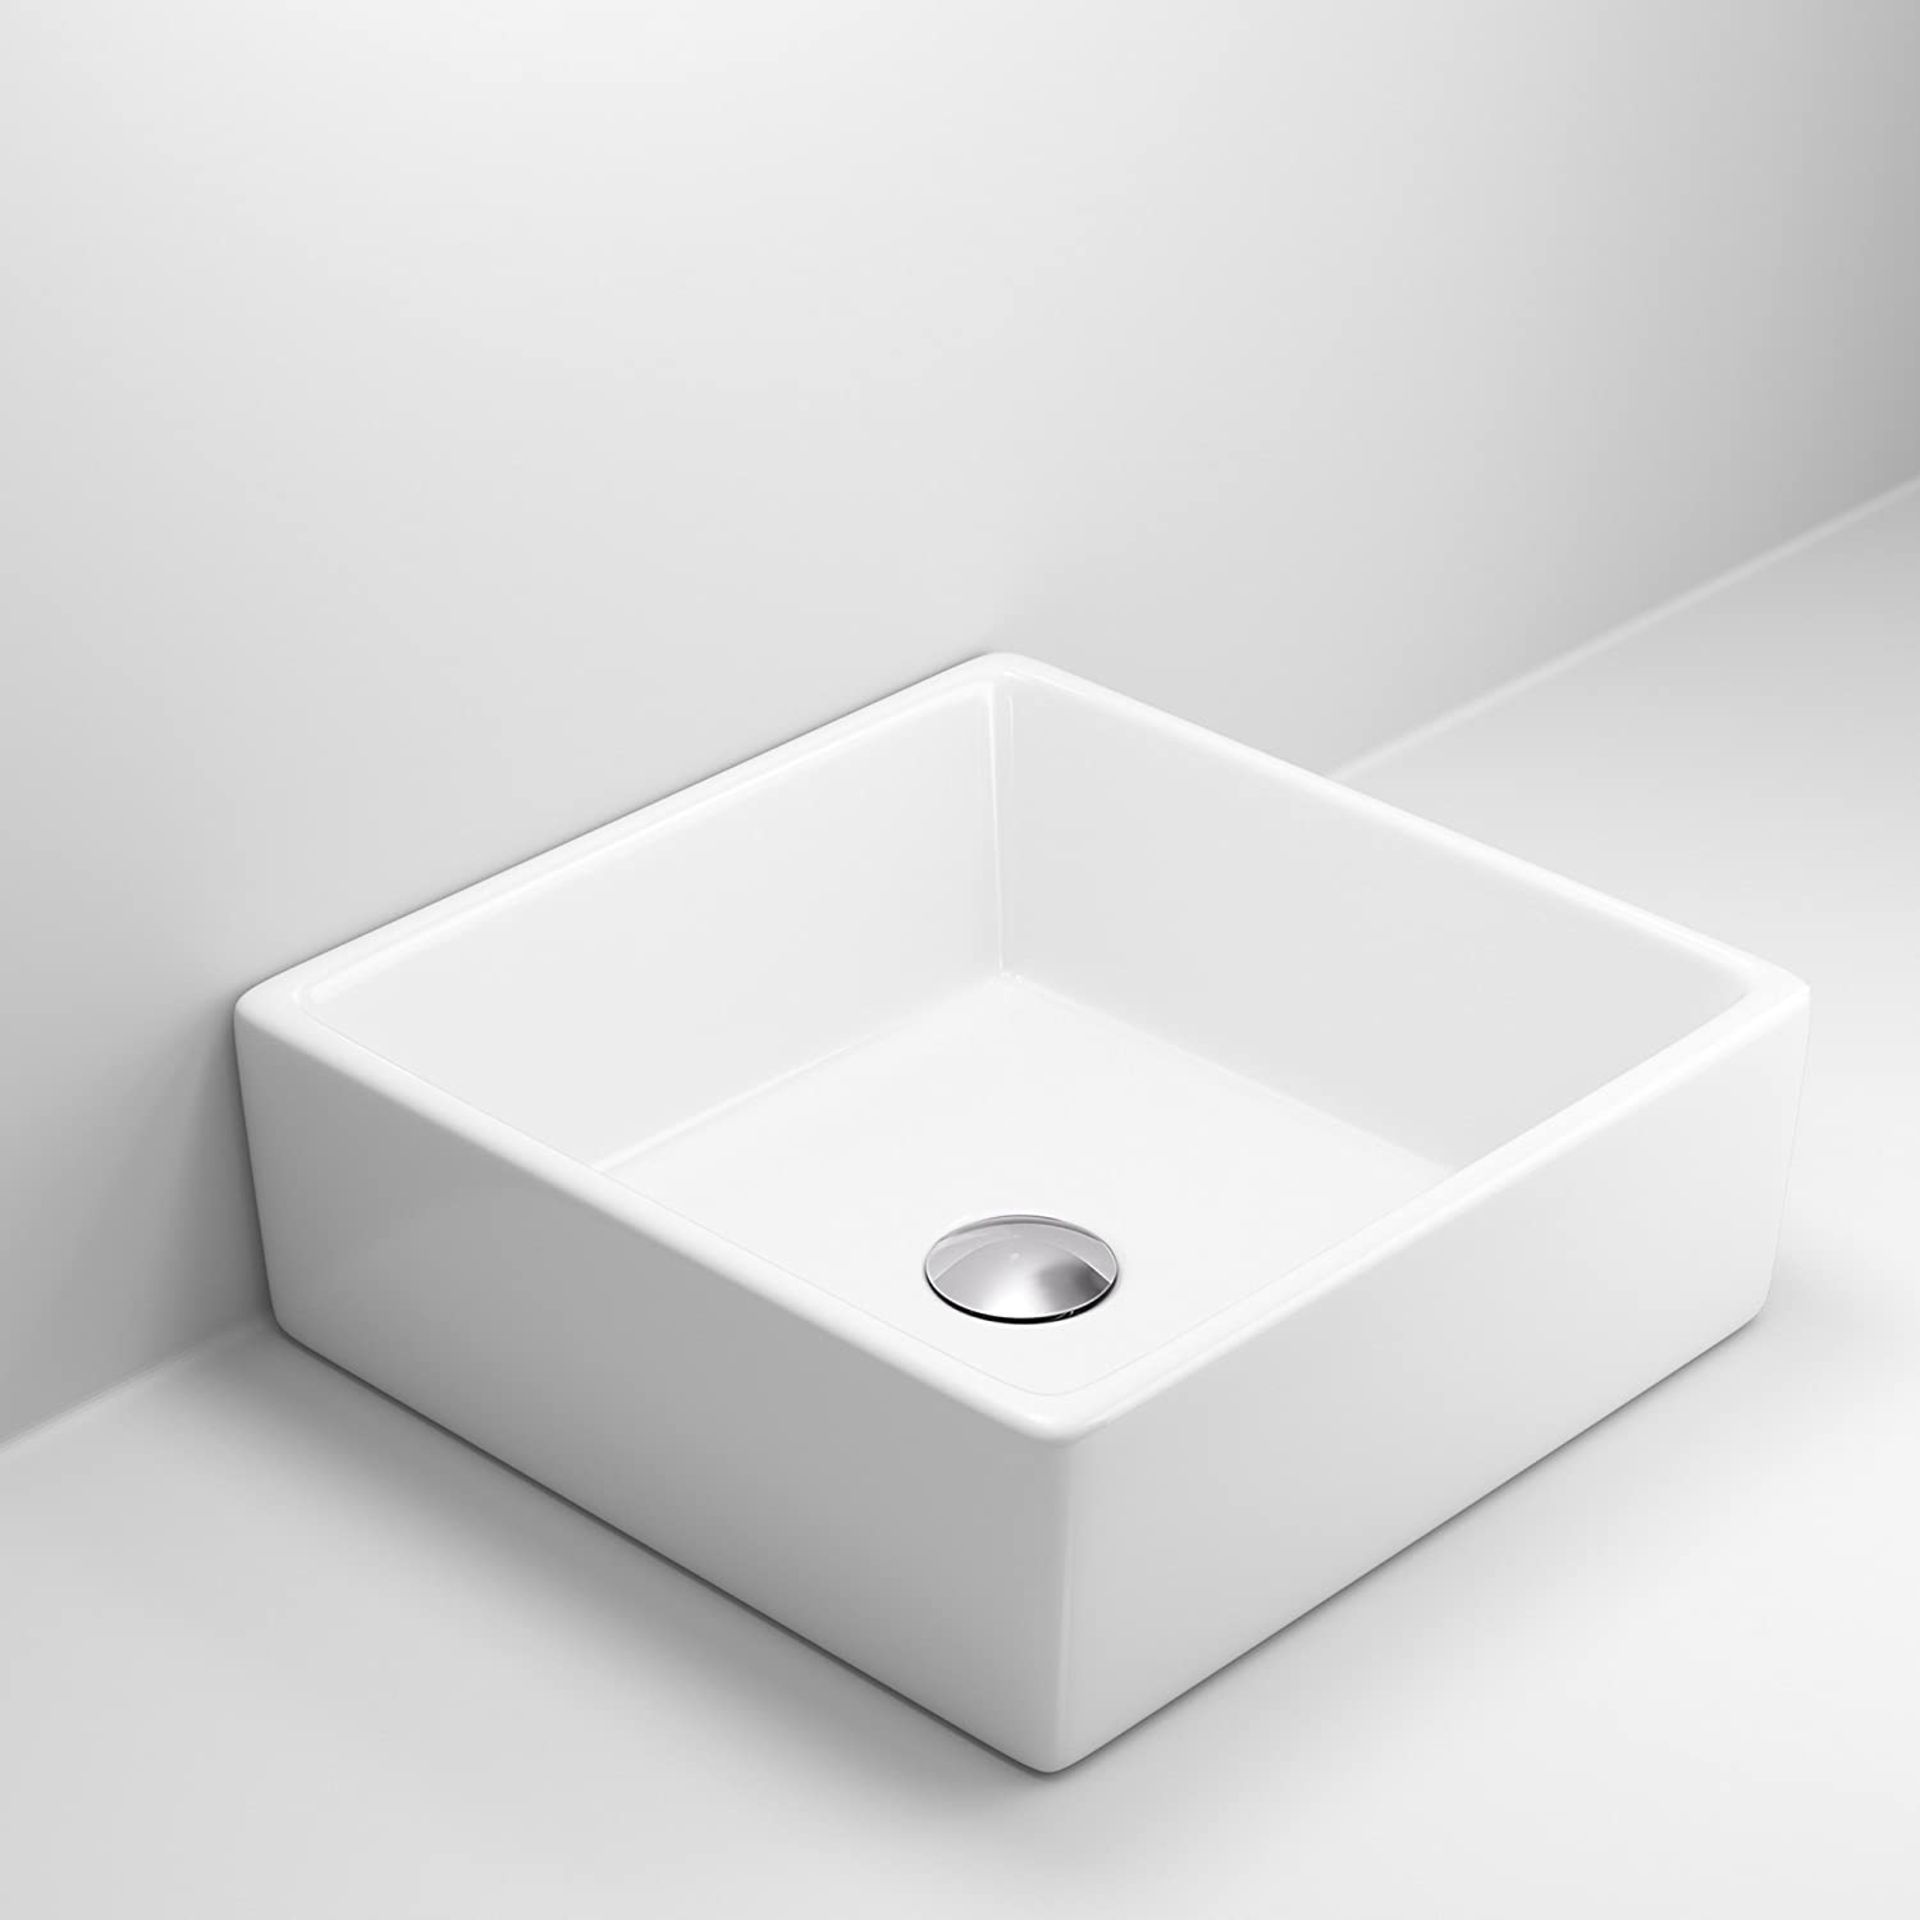 NEW (NS116) Modern Square Ceramic Cloakroom Basin Countertop Bathroom Sink. Made from White Vit... - Image 2 of 2